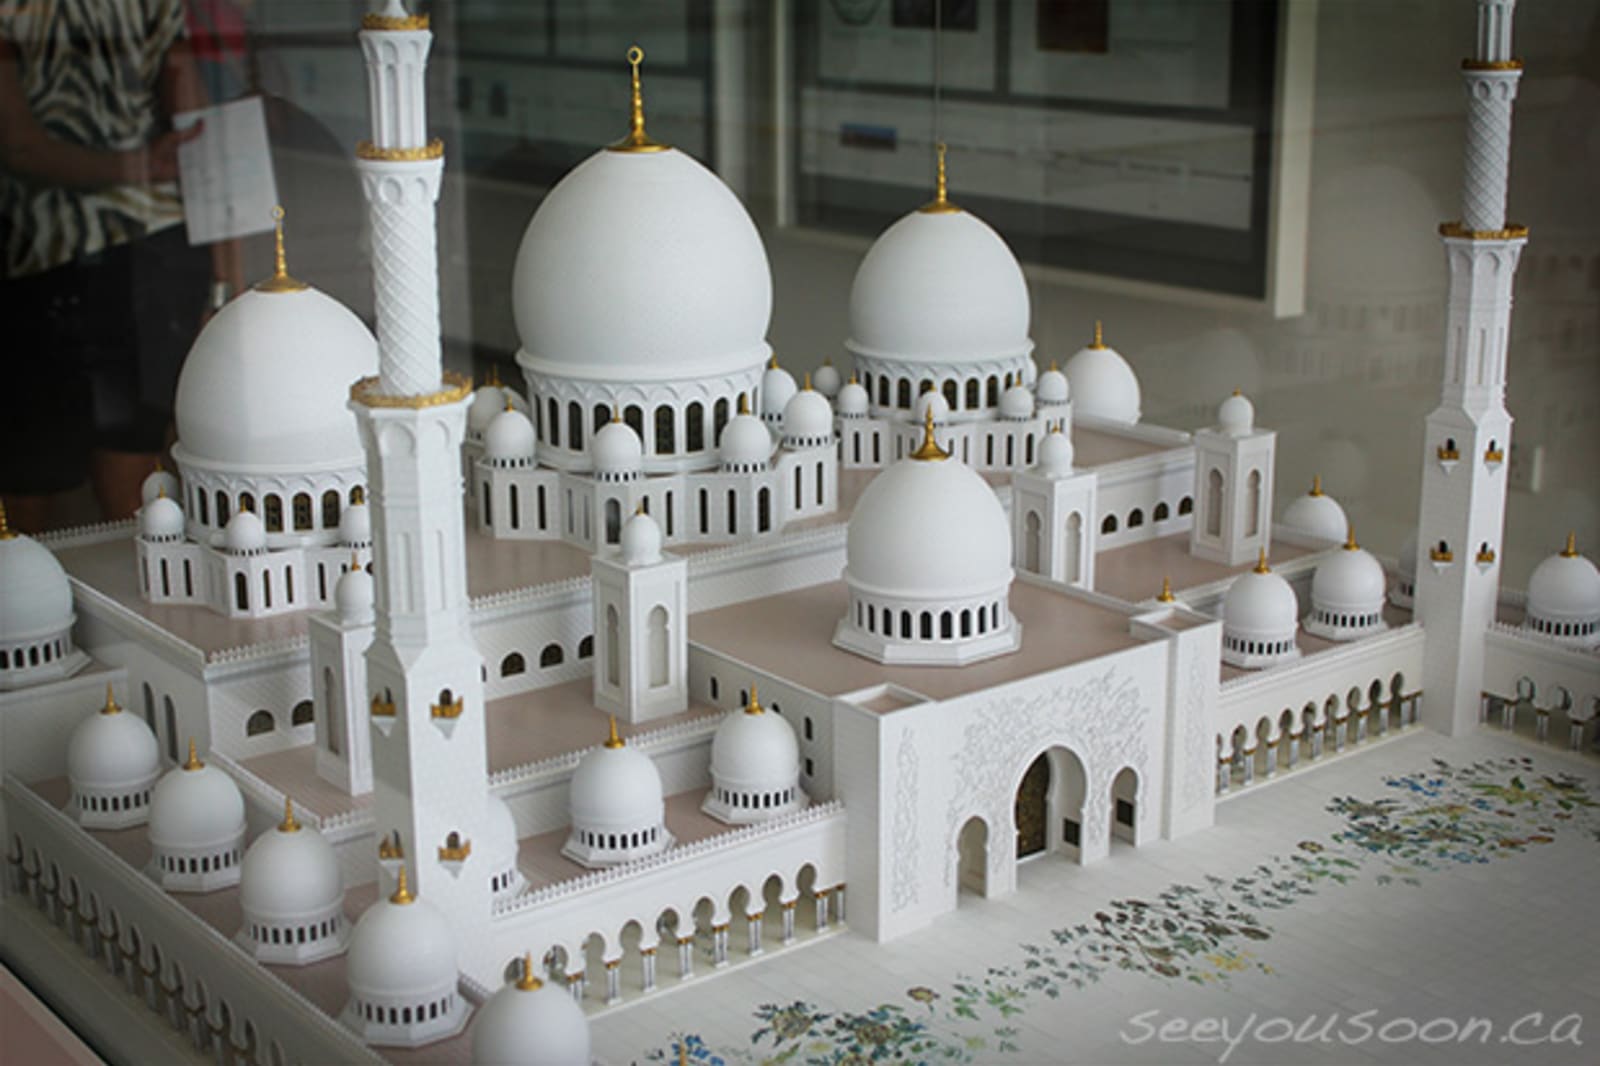 Scale model of the Sheikh Zayed Mosque